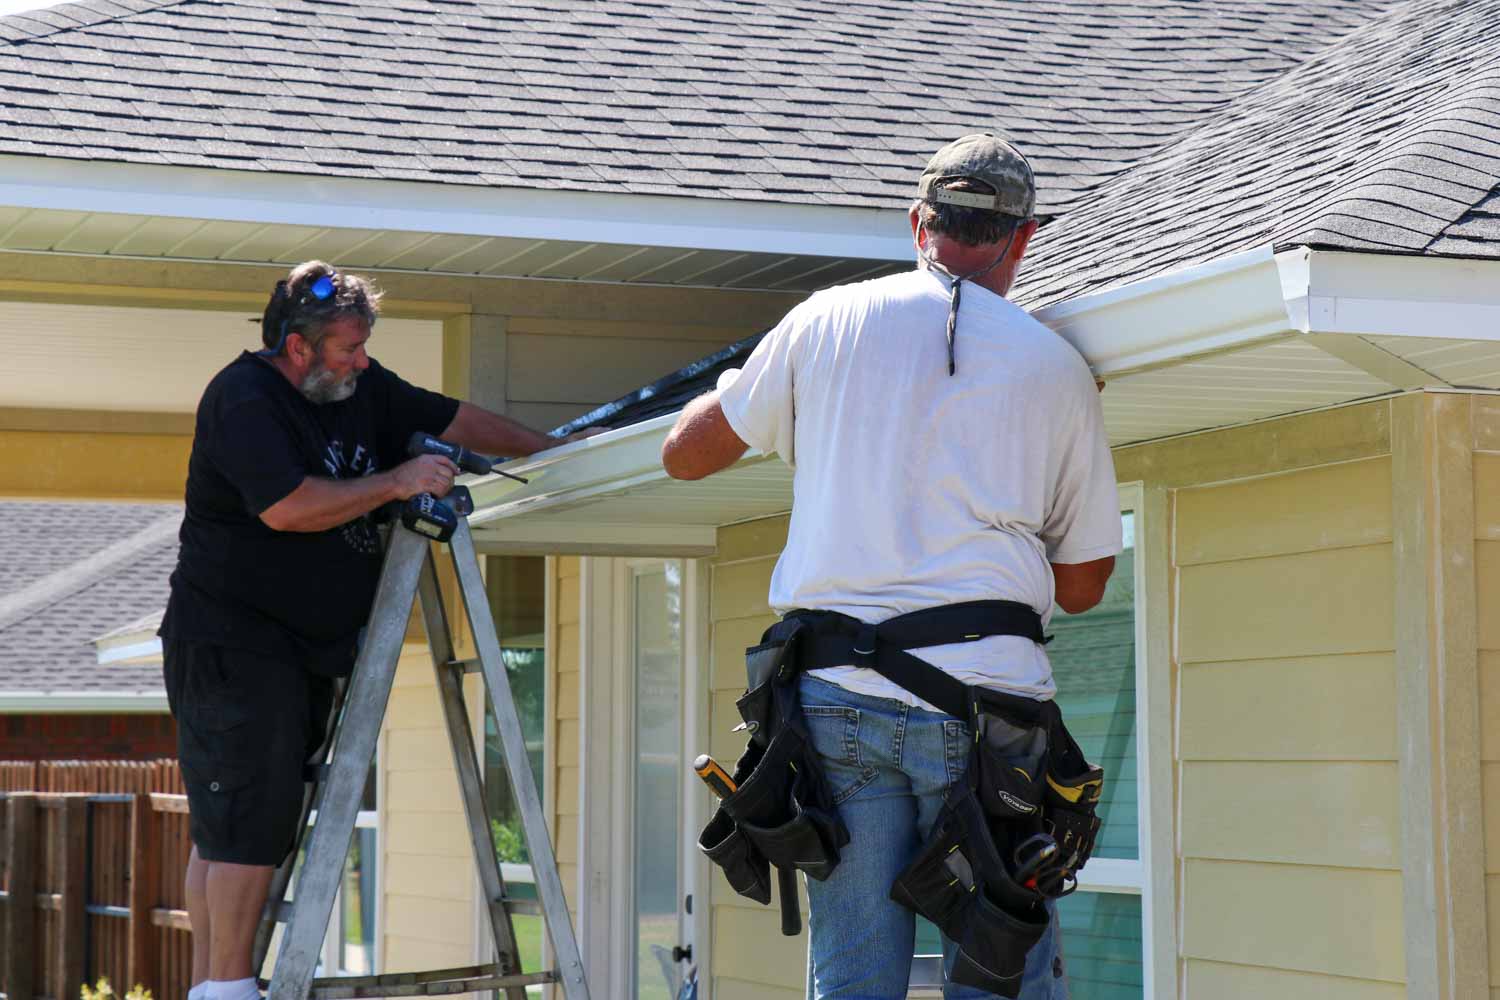 Gordon and Larry installing a length of seamless gutter on a home in Panama City, FL